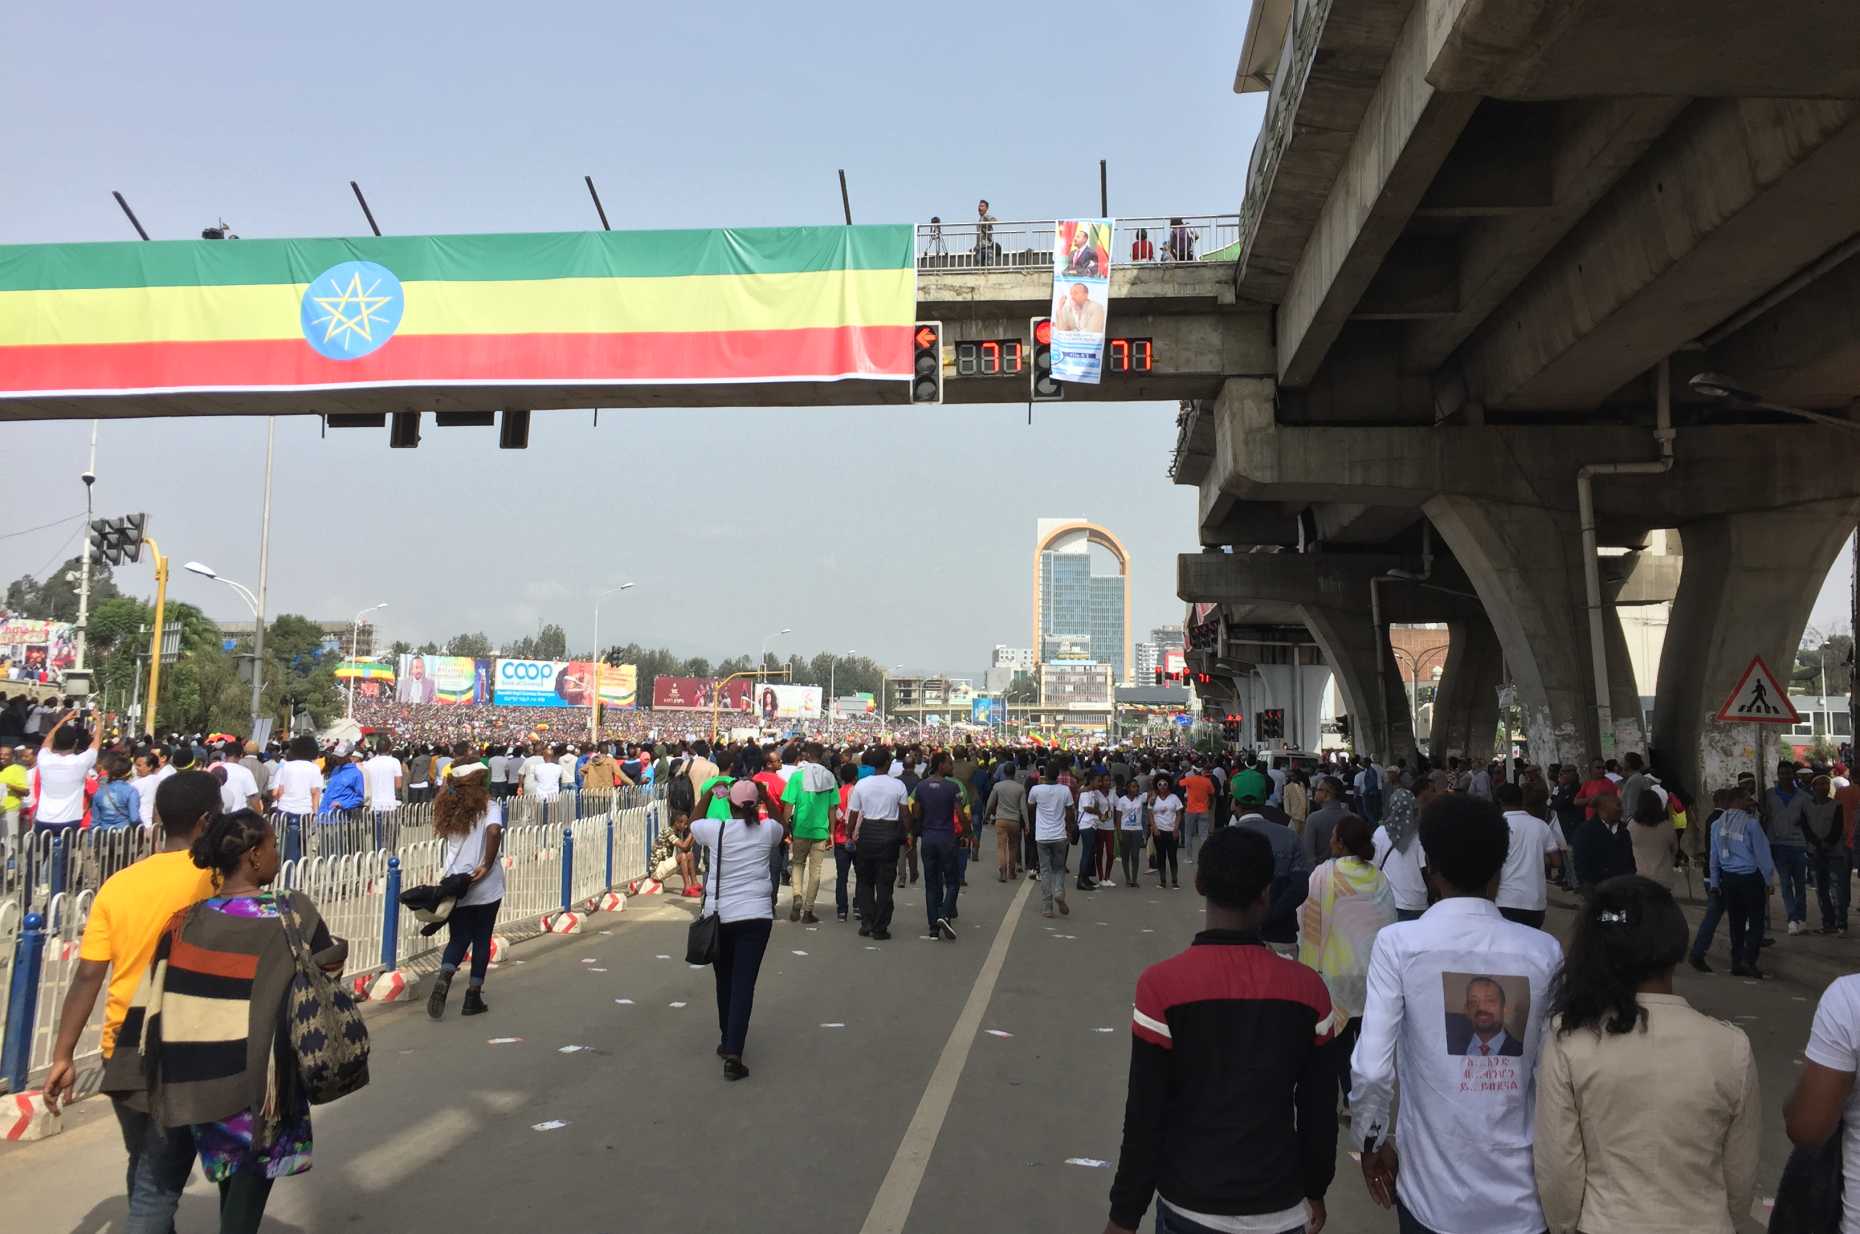 Addis Ababa on 23rd June 2018 before the grenade attack at PM Abiy Ahmed’s public address. Photo: Abraham T Wate